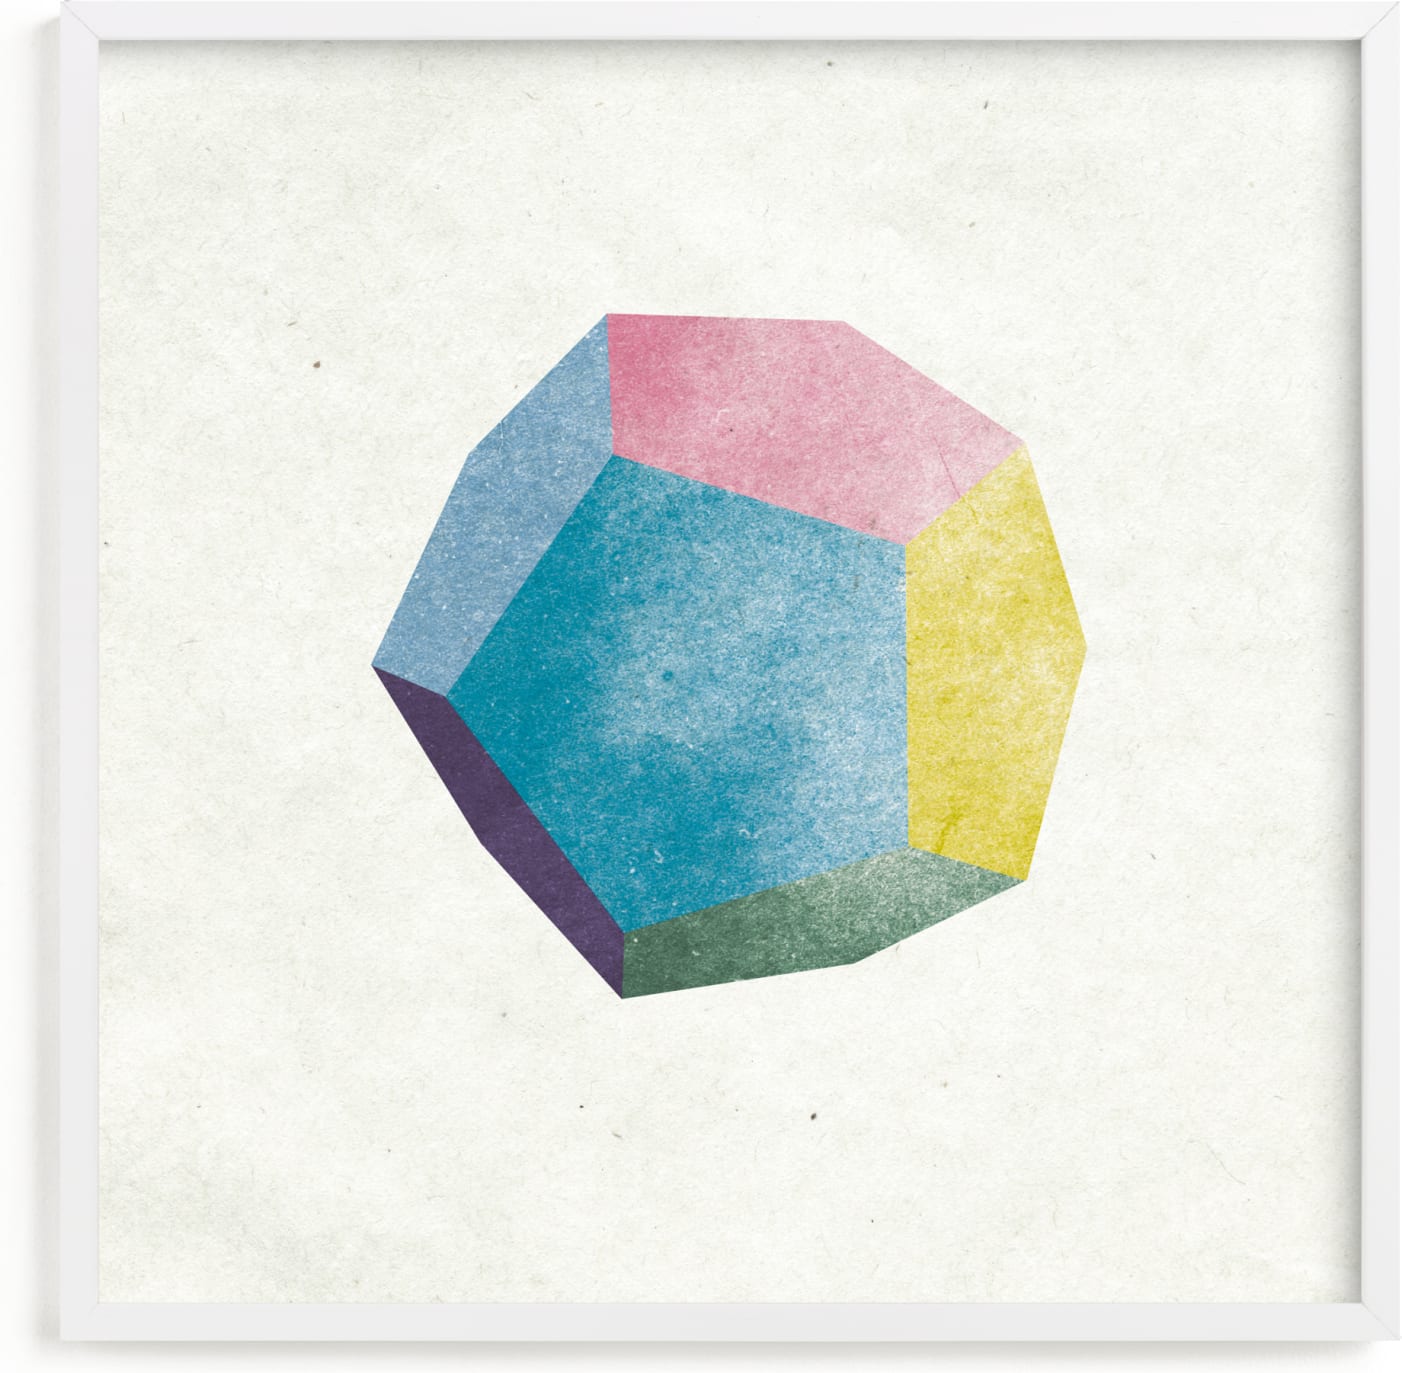 This is a blue kids wall art by Sumak Studio called dreamy dodecahedron.